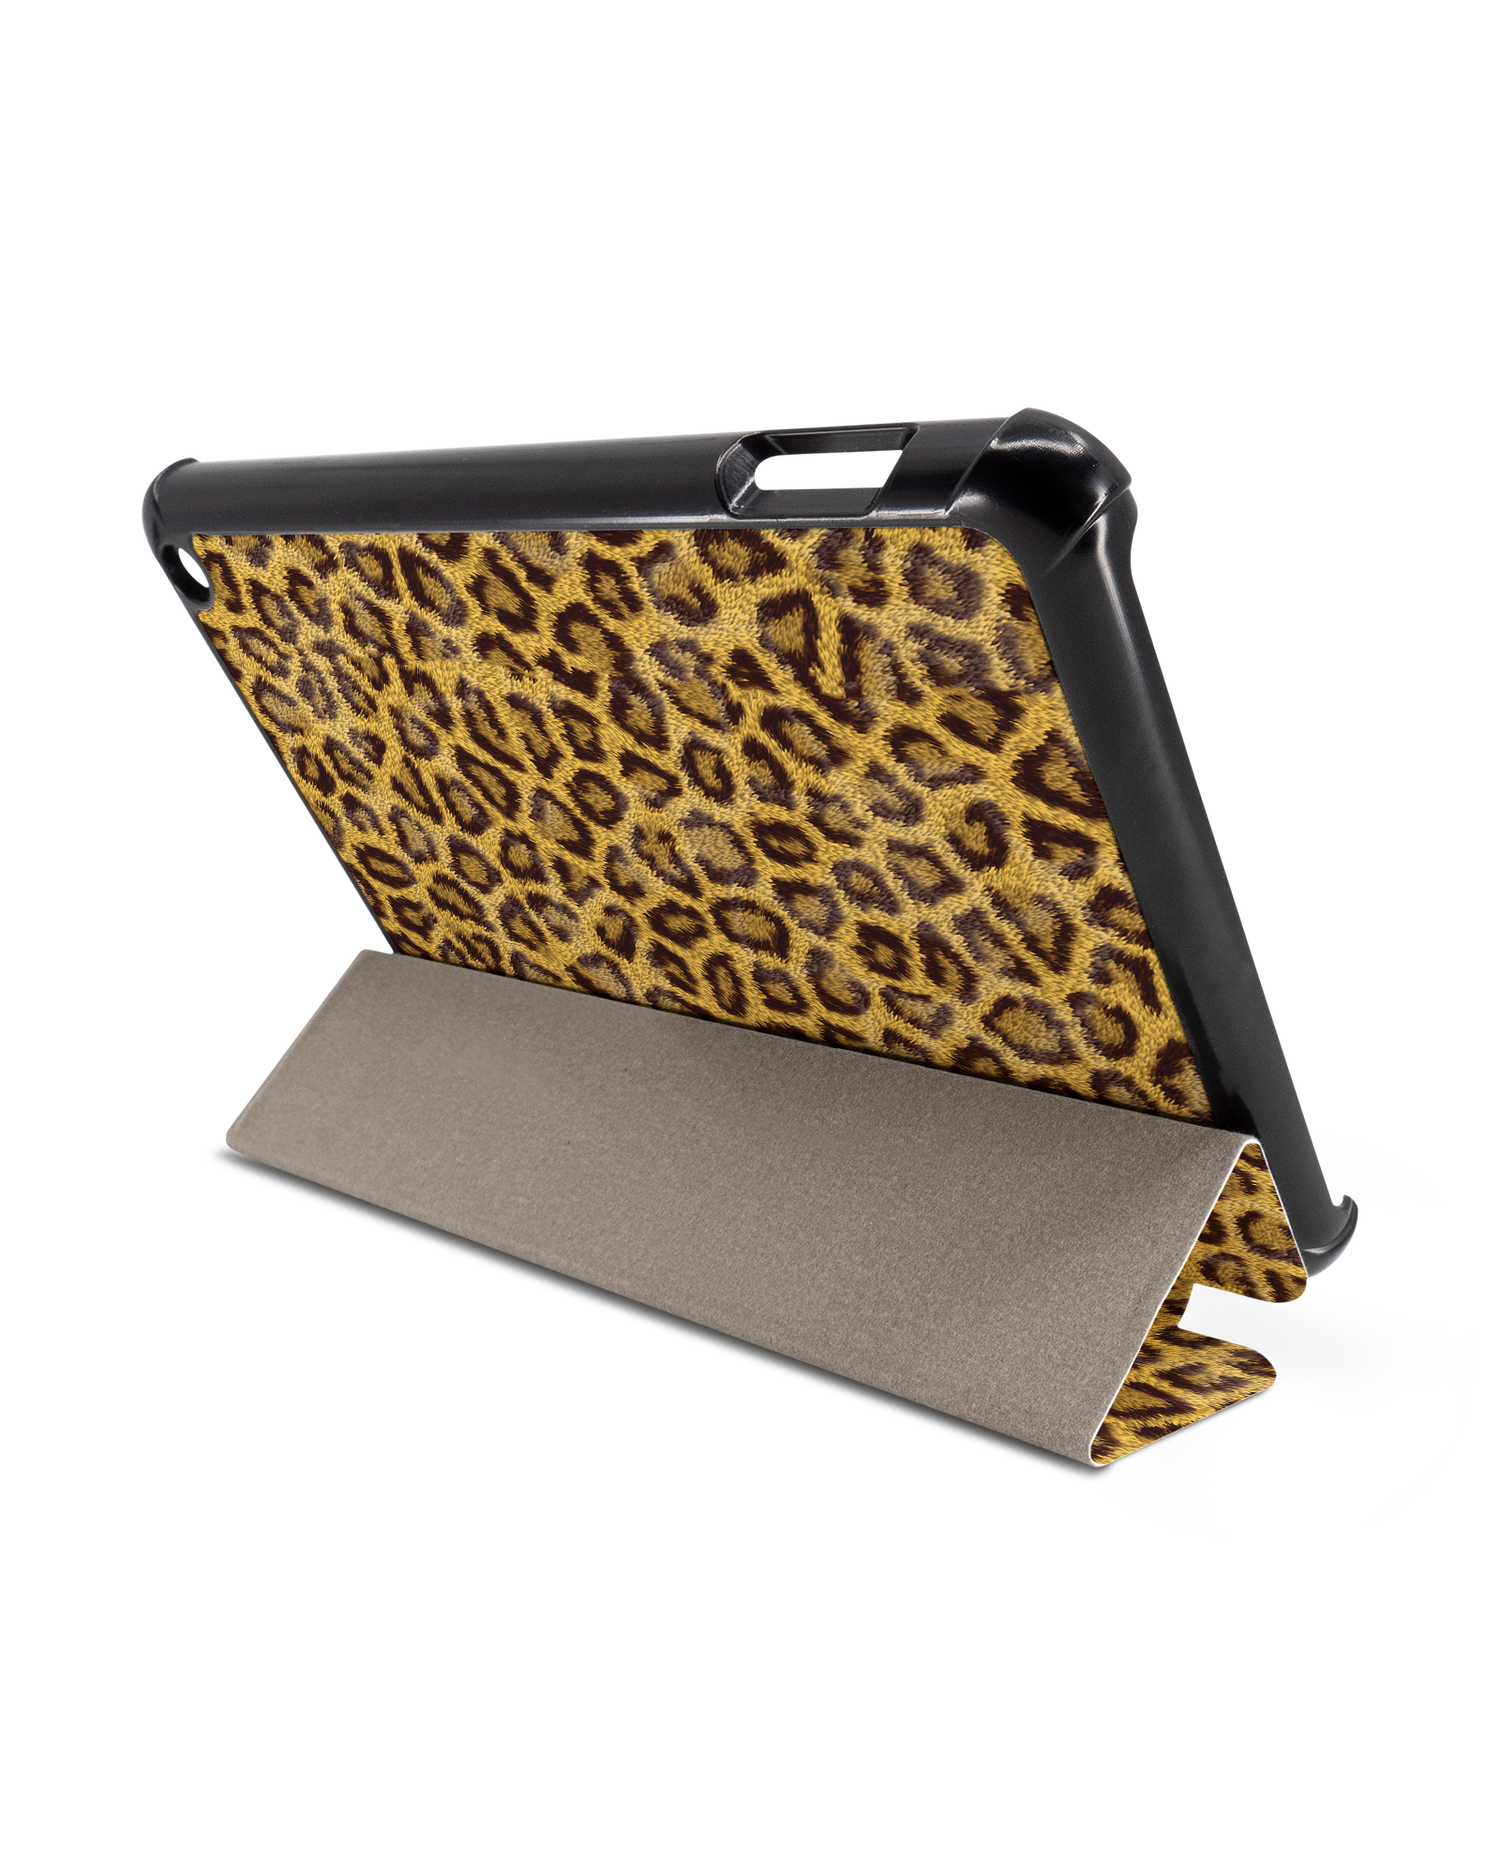 Leopard Skin Tablet Smart Case for Amazon Fire 7 (2022): Used as Stand